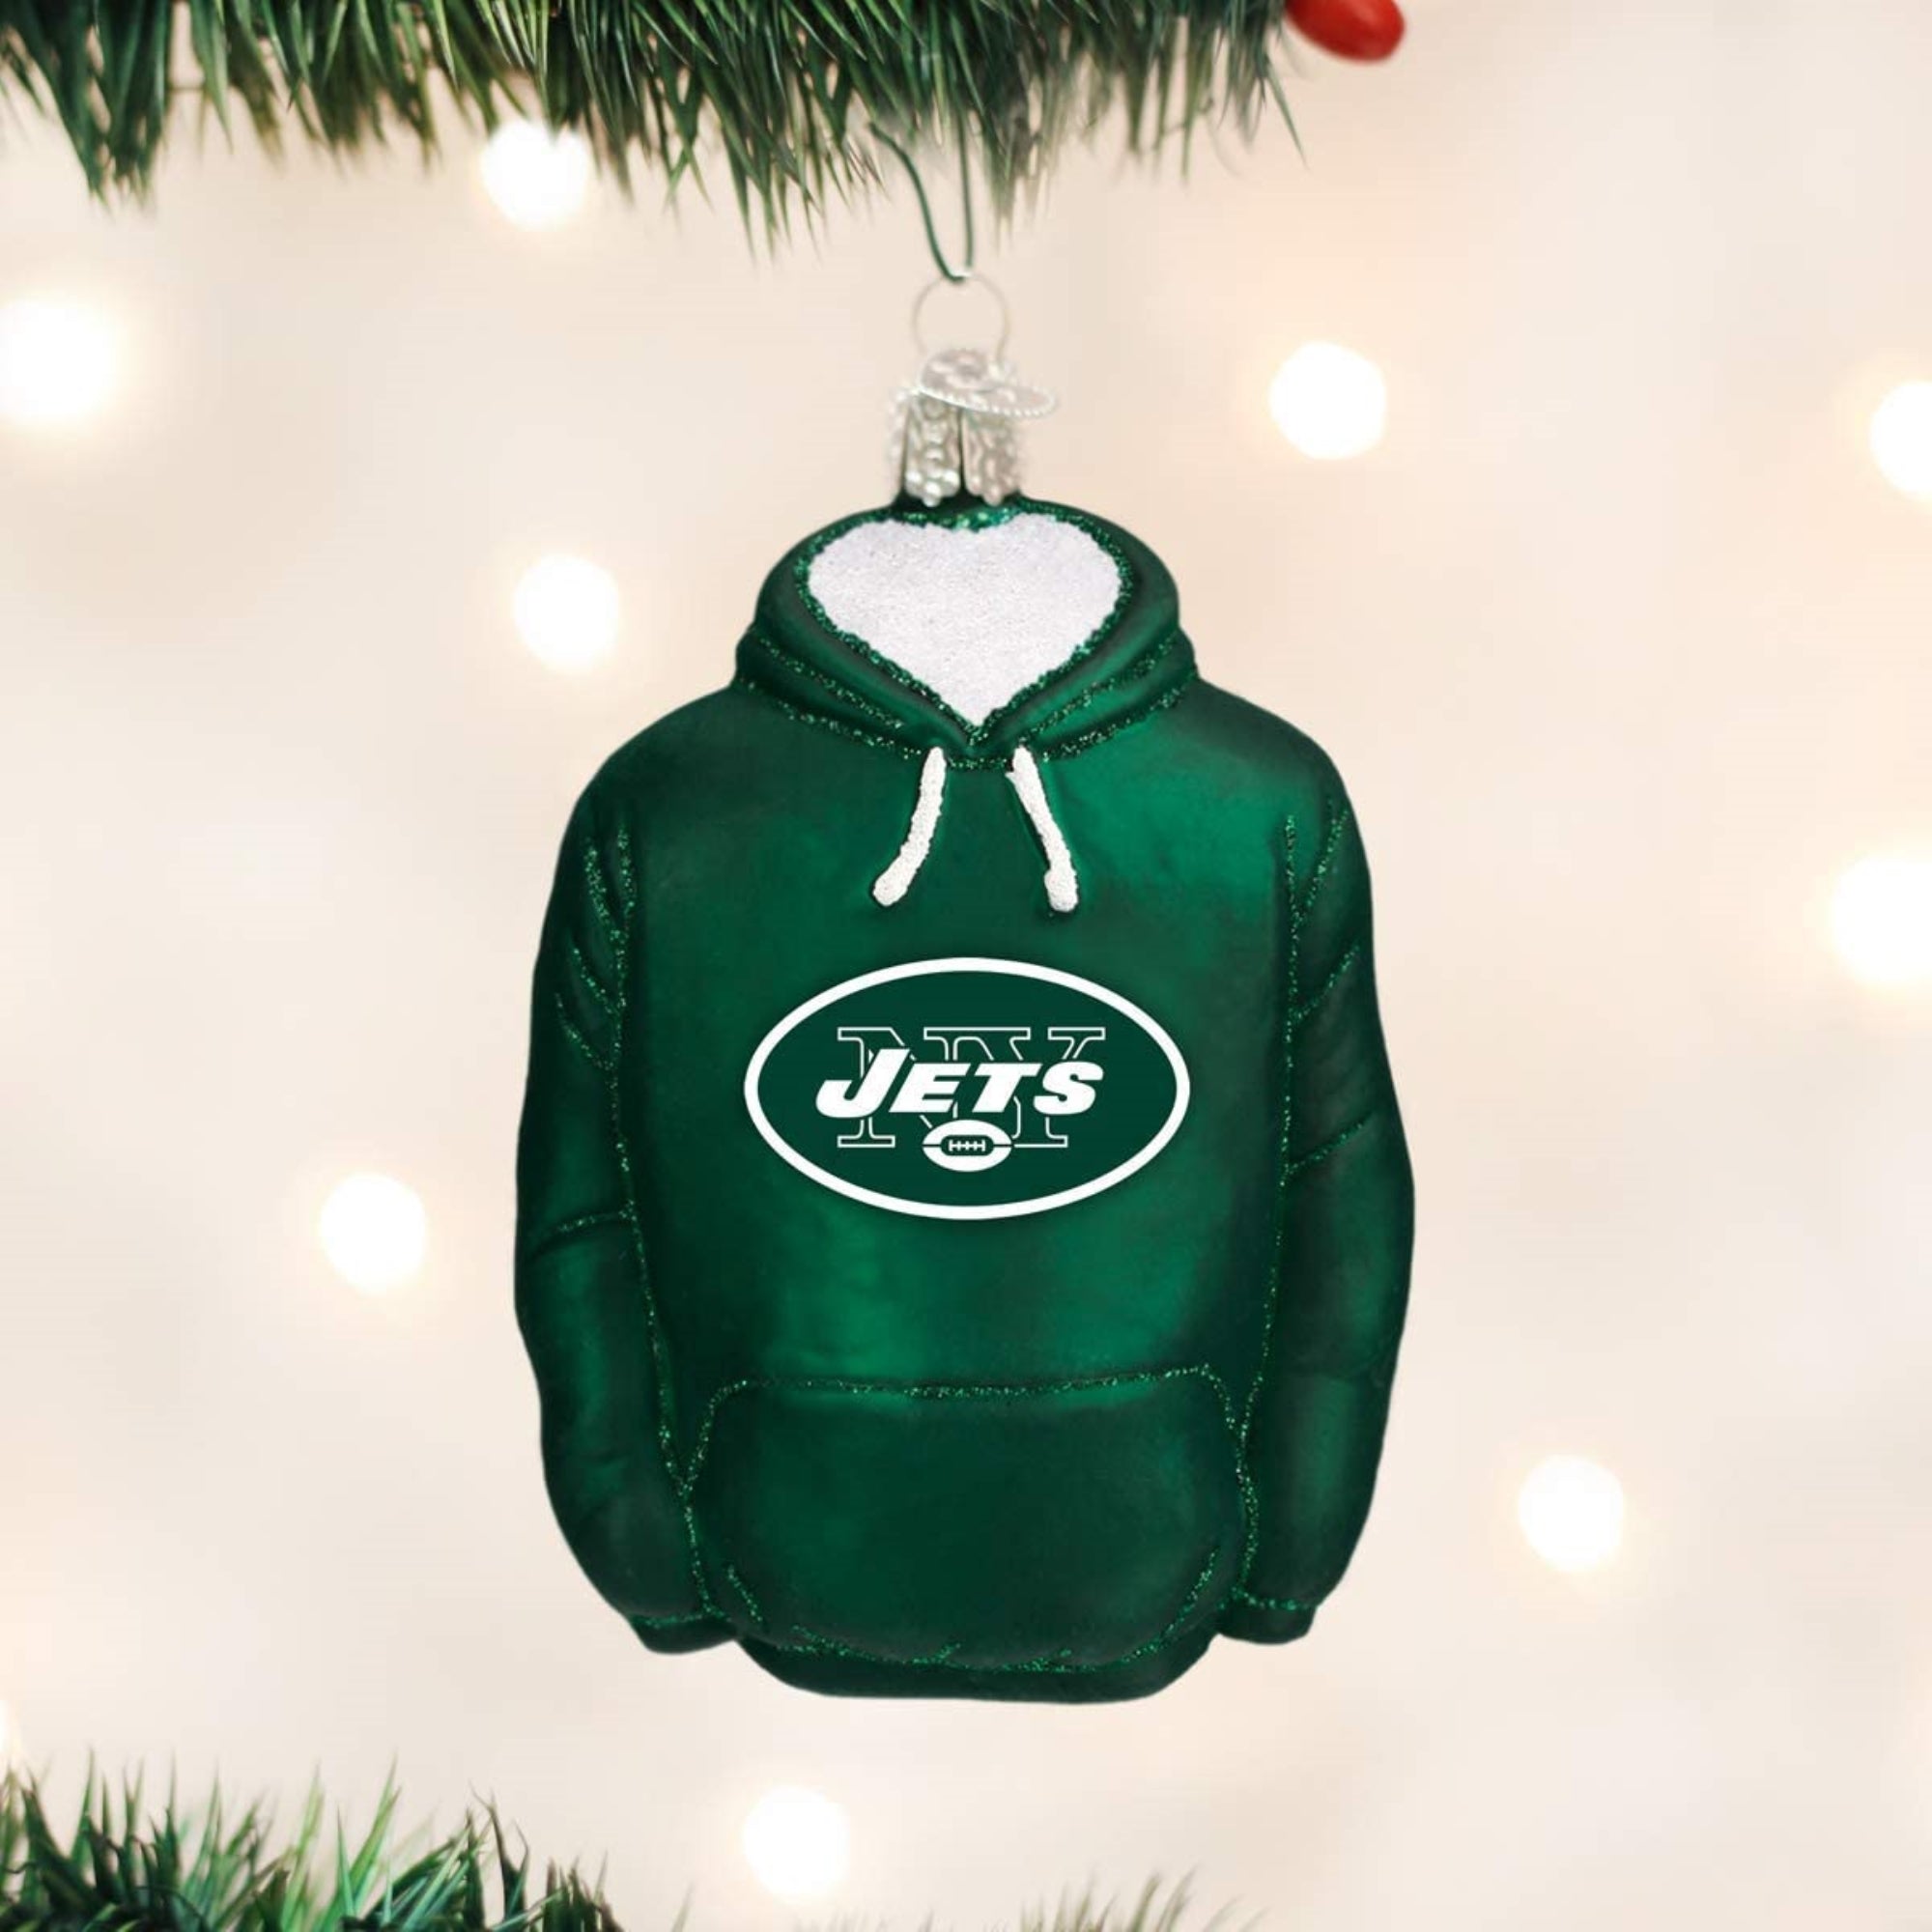 Old World Christmas New York Jets Hoodie Ornament For Christmas Tree